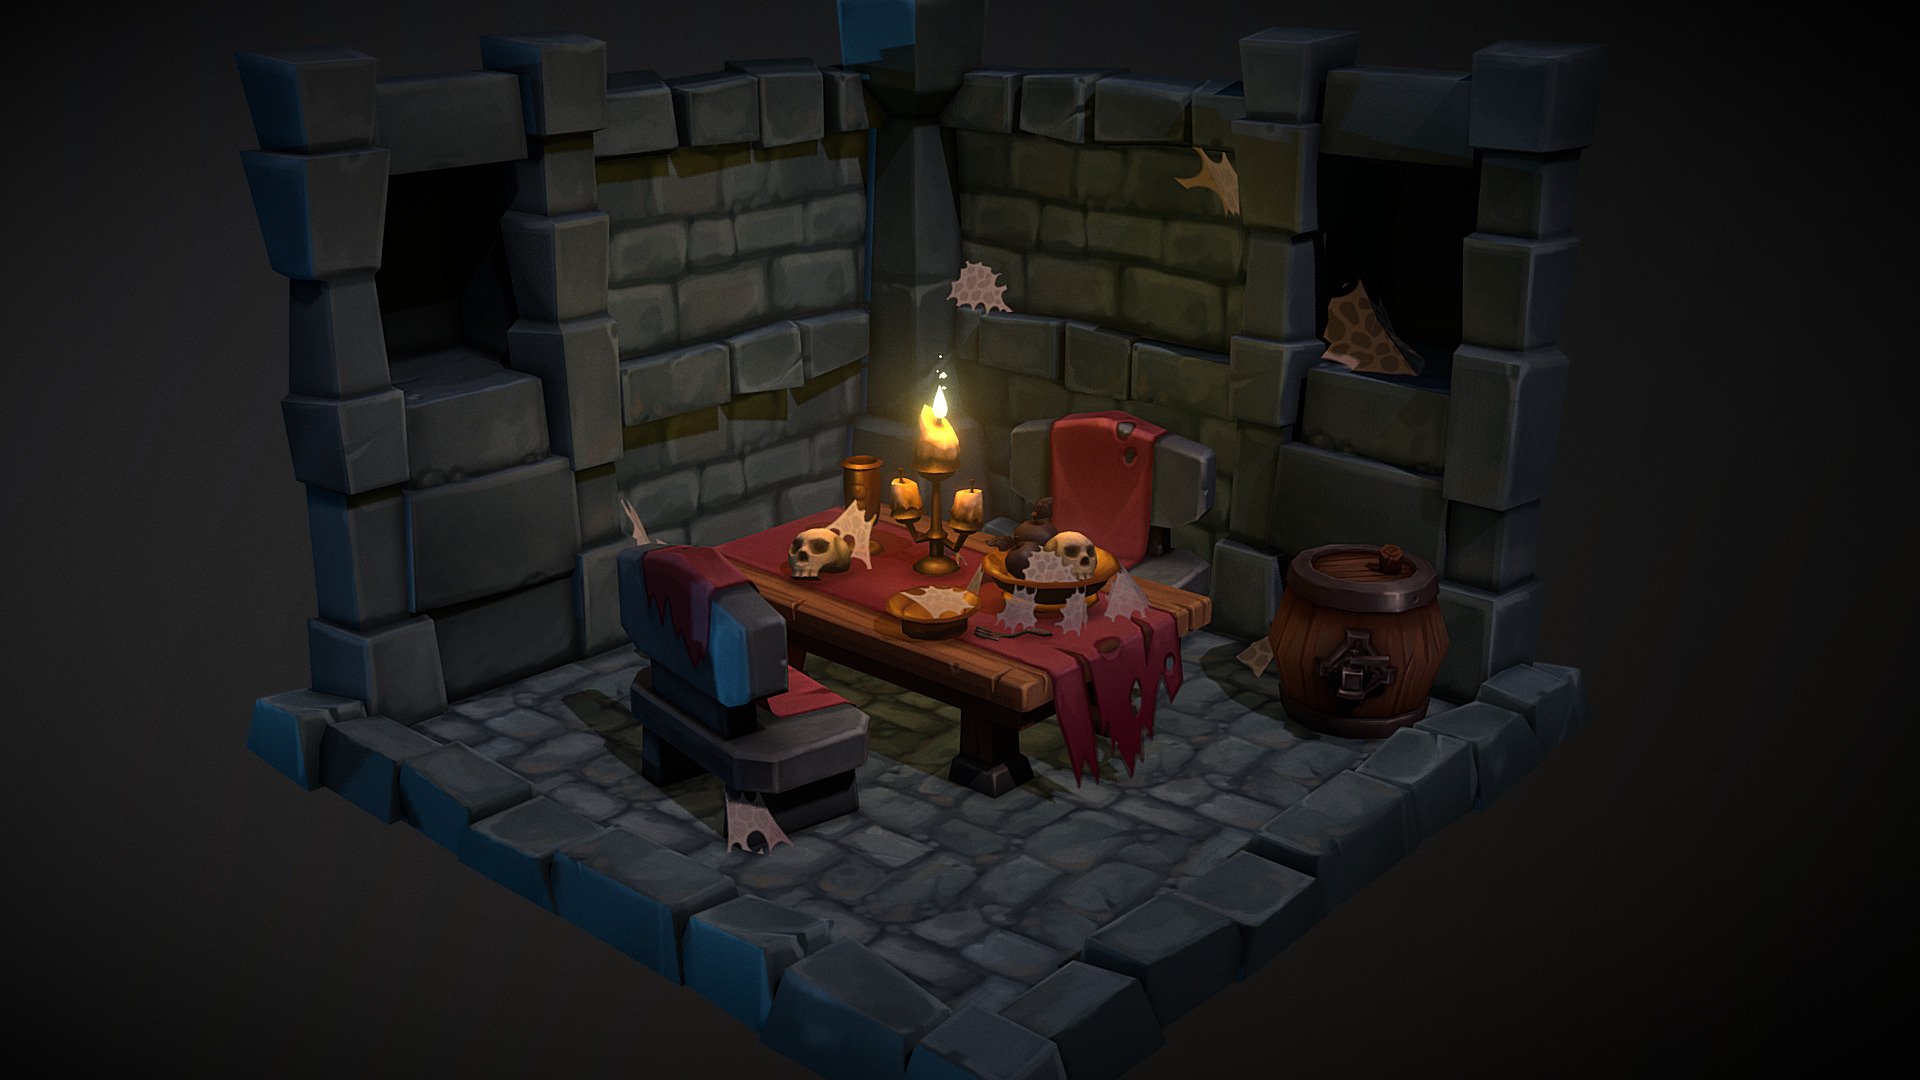 Dungeon diorama based on concepts by Arthur Gimaldinov

https://gimaldinov.deviantart.com/art/Entourage-concepts-361875702

This time with little animation. All in blender.

Regards, riceart 3d model